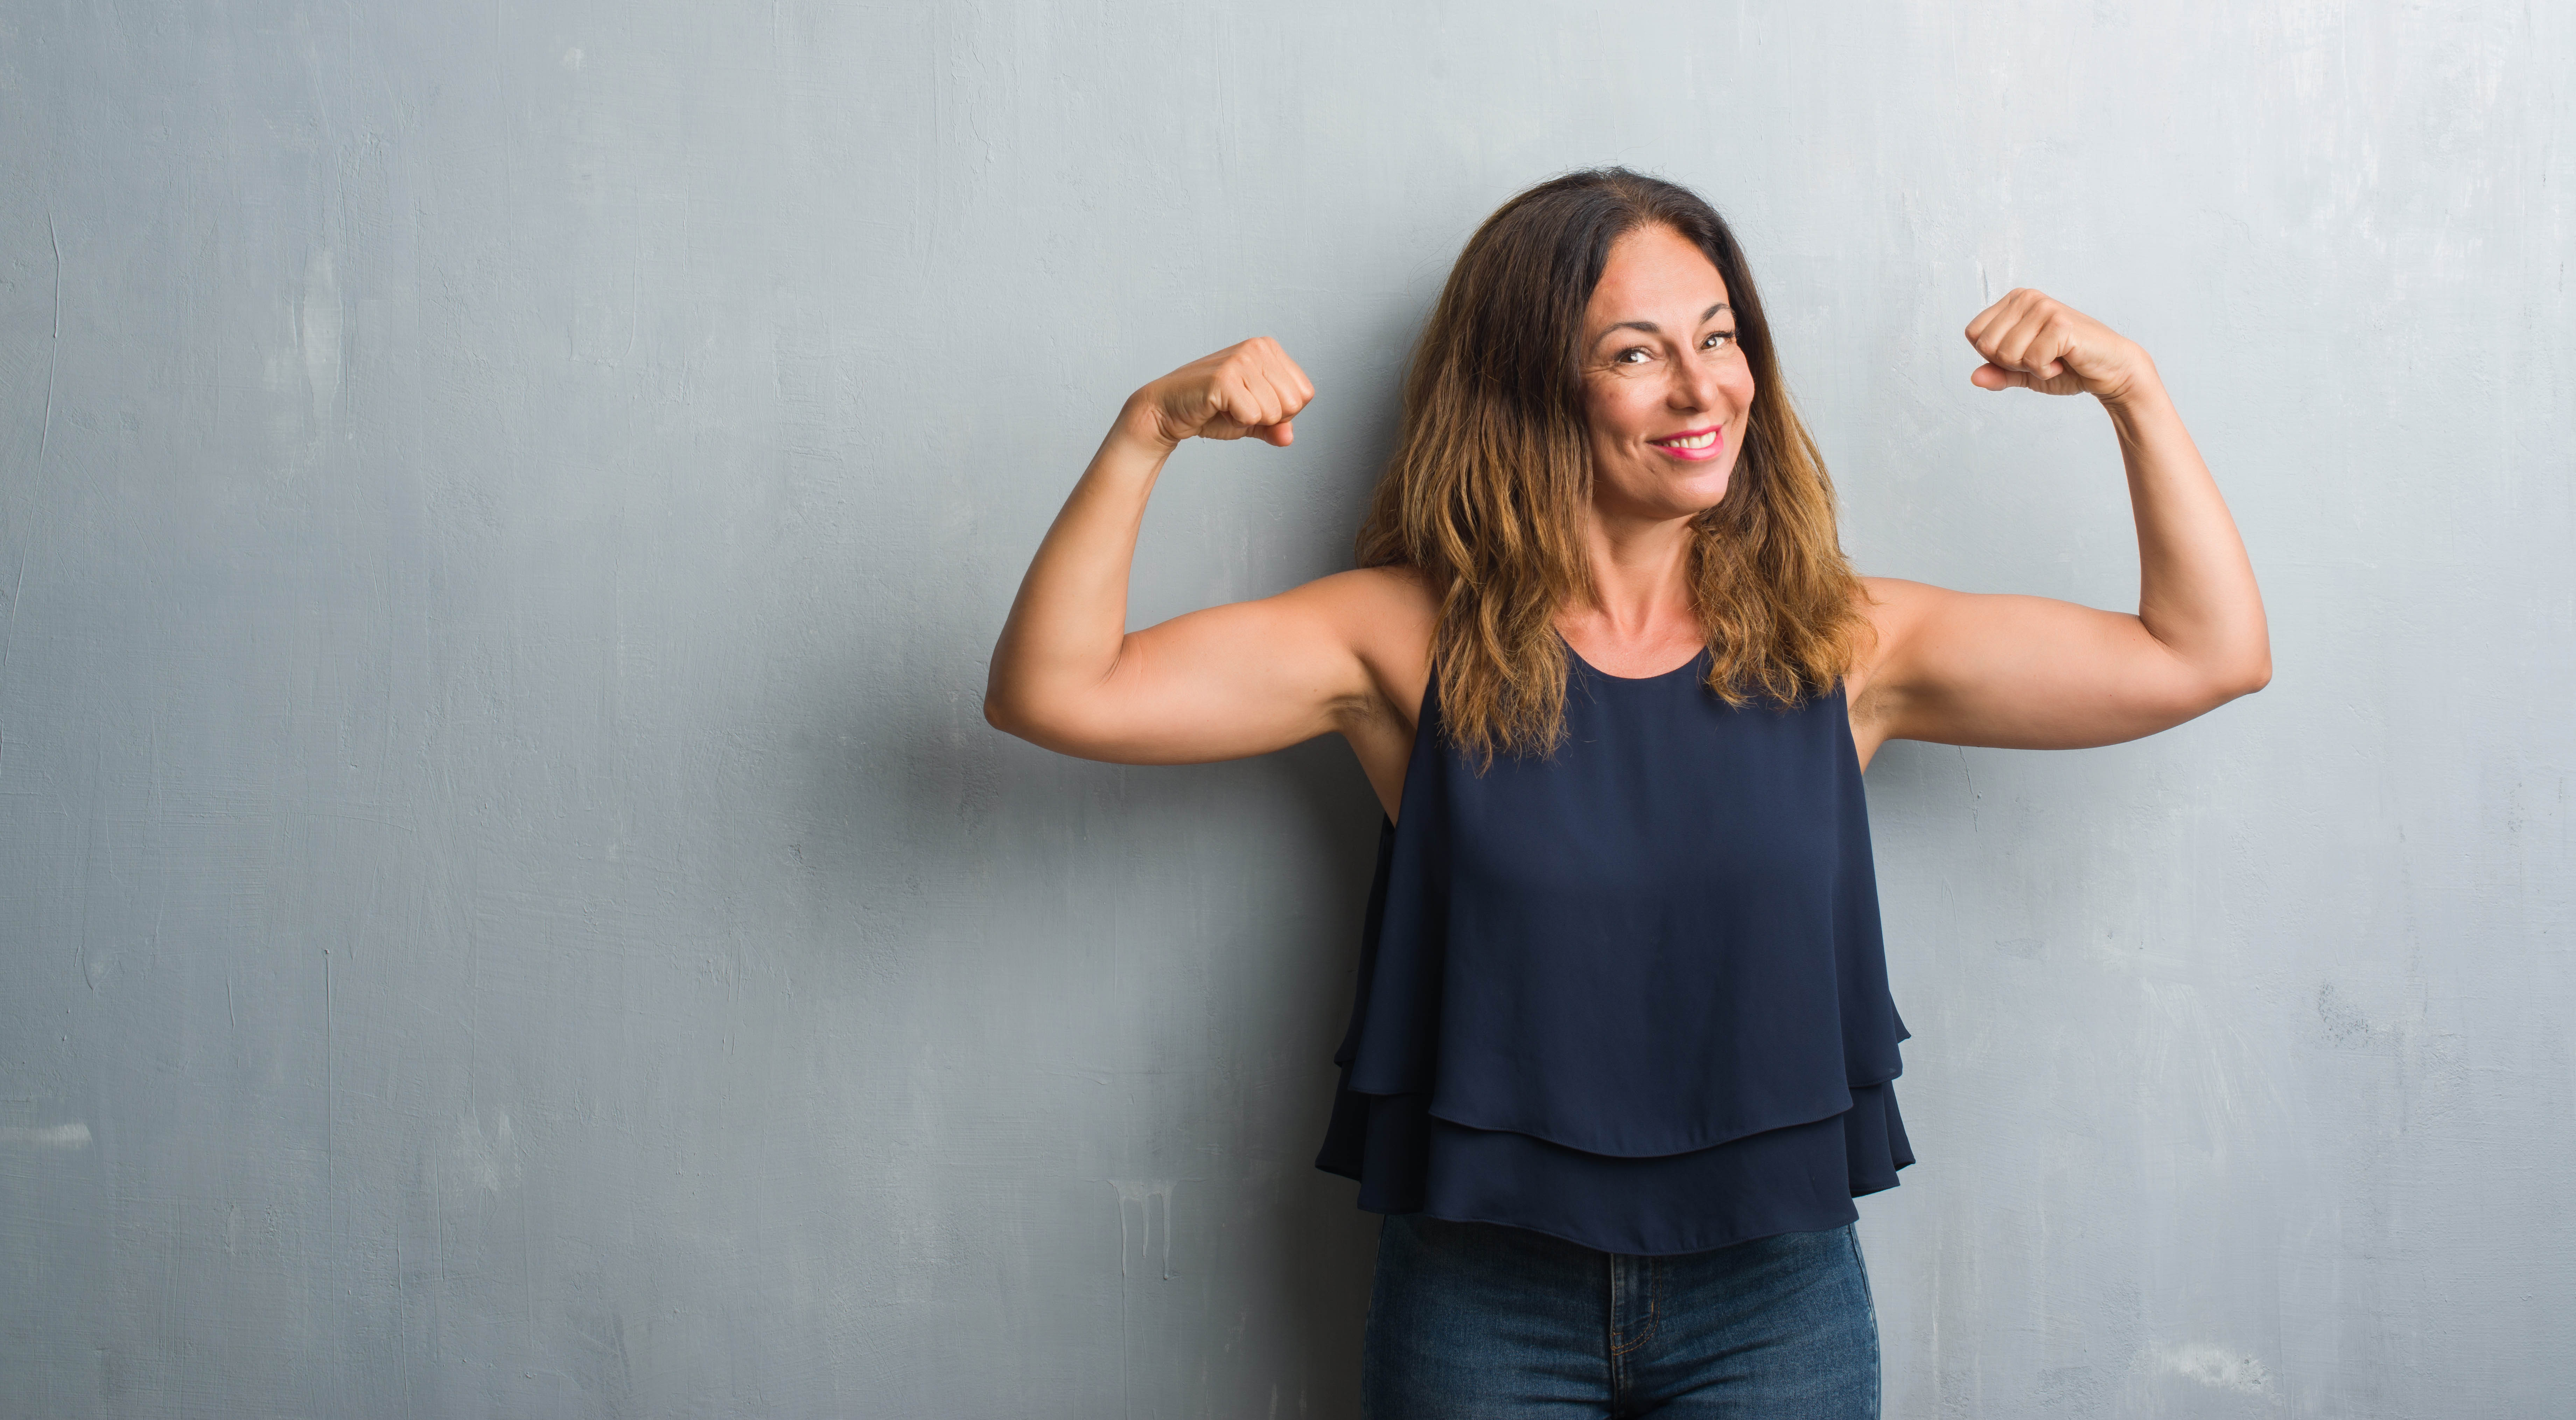 Middle aged fit woman smiling at the camera and flexing her arms